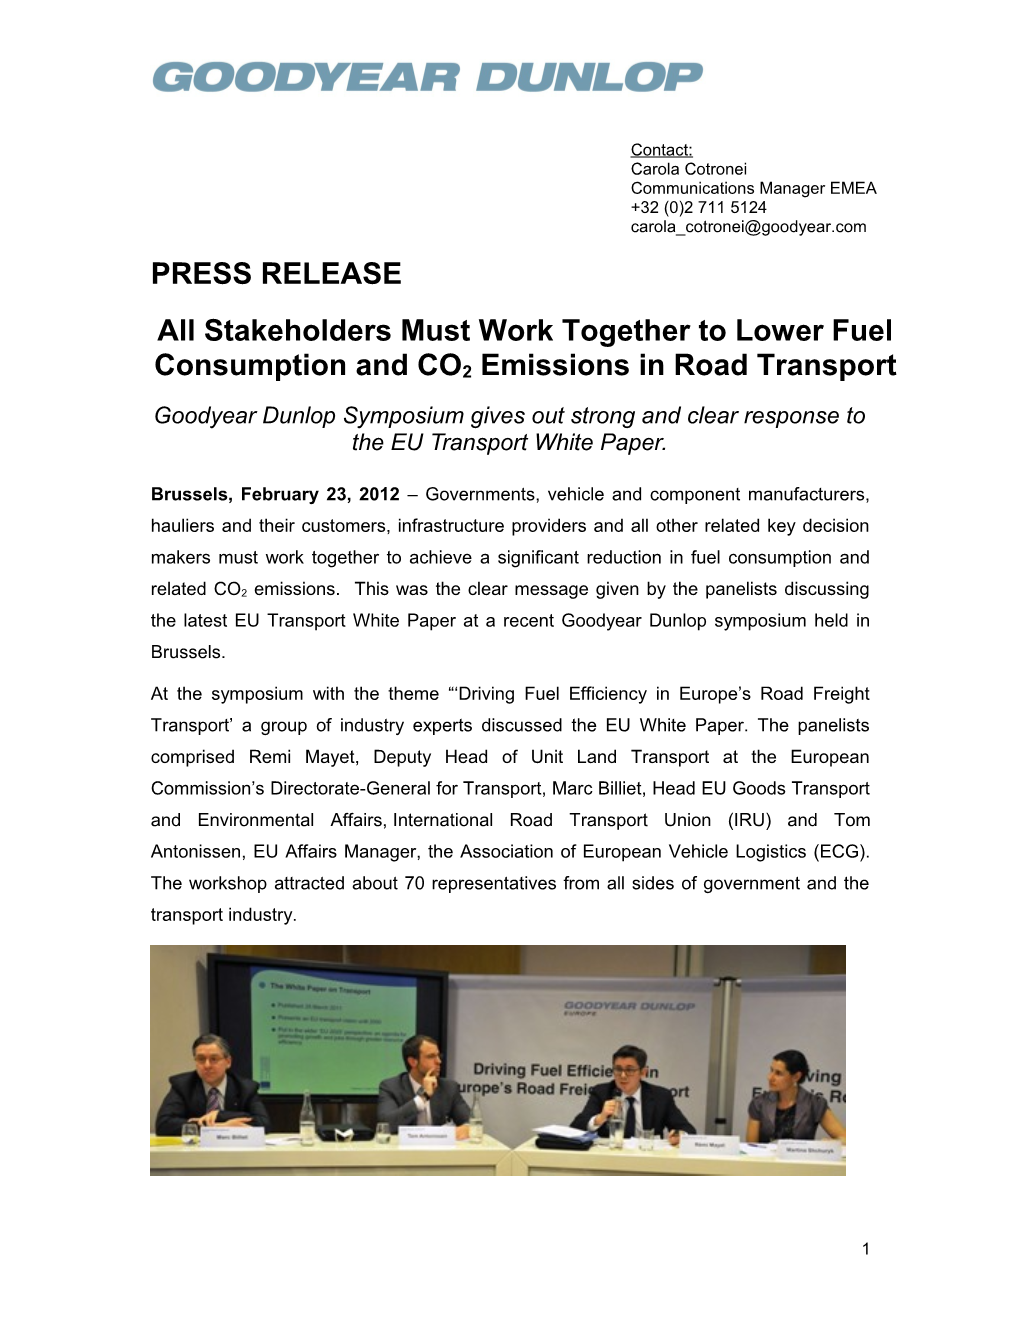 All Stakeholders Must Work Together to Lower Fuel Consumption and CO2 Emissions in Road